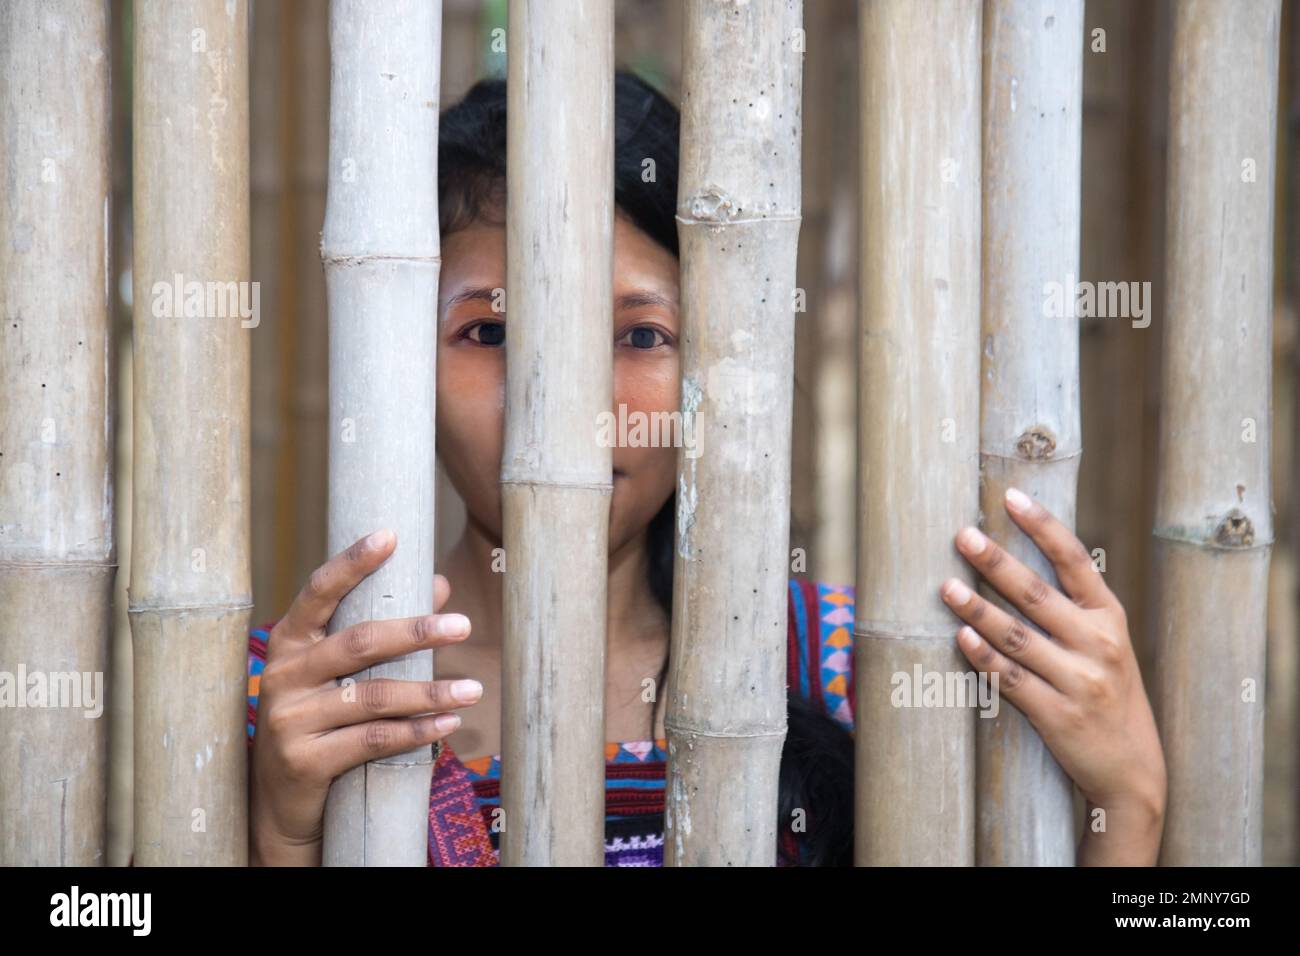 A young woman looks through a bamboo fence Stock Photo